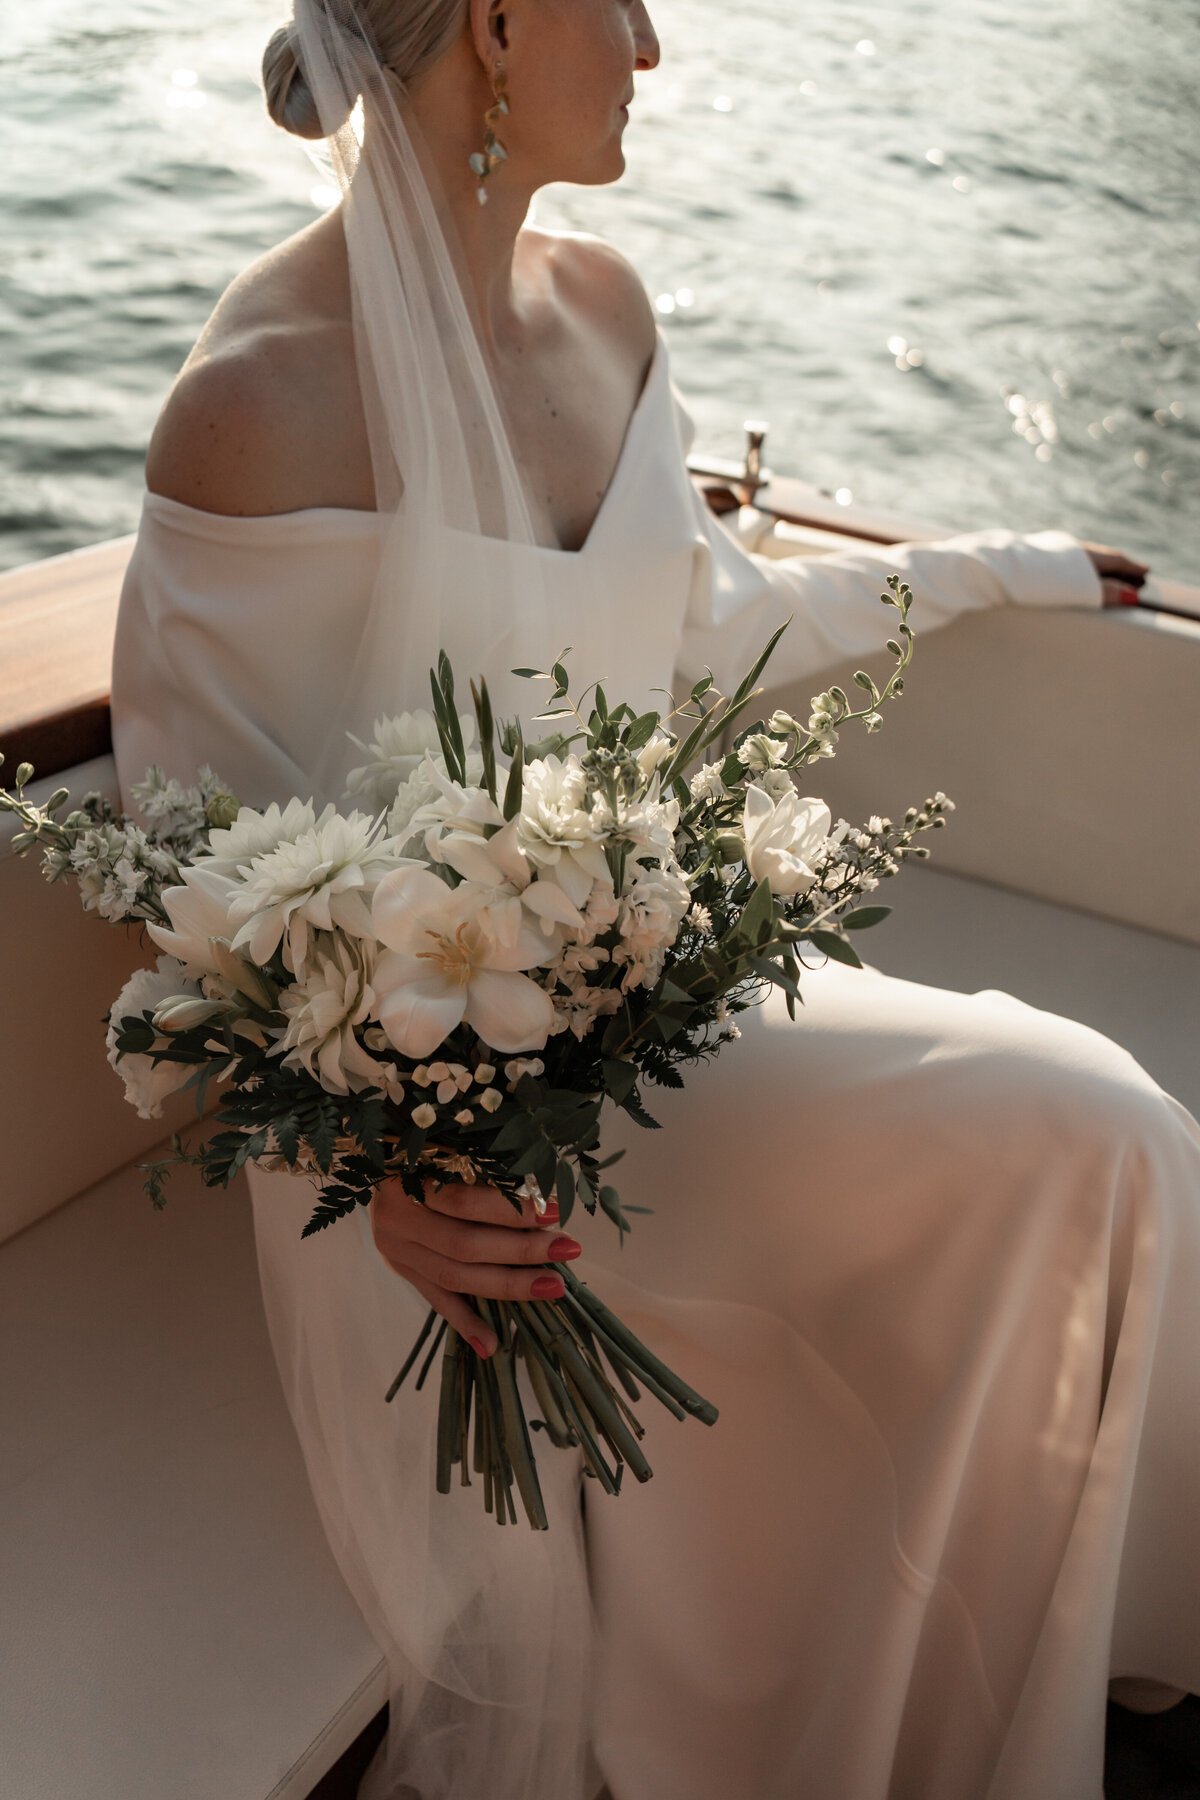 Getting married on Lake Como